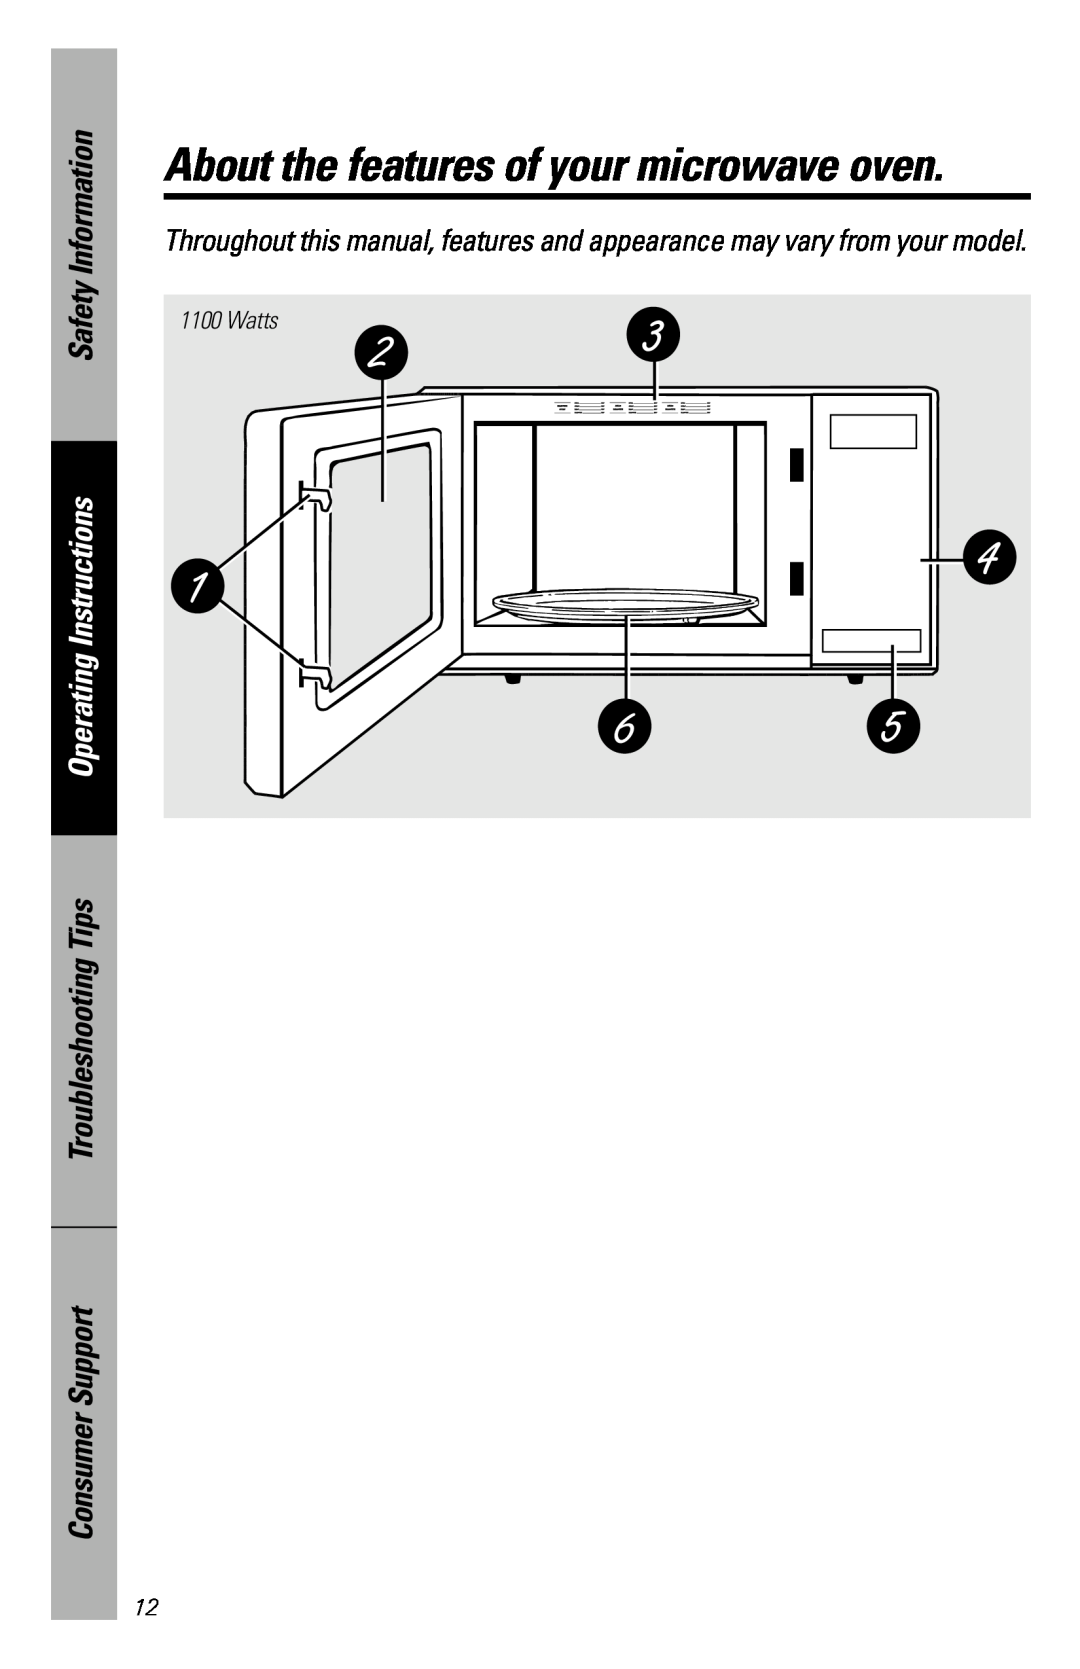 GE JES1034 owner manual About the features of your microwave oven, Safety Information, Operating Instructions 